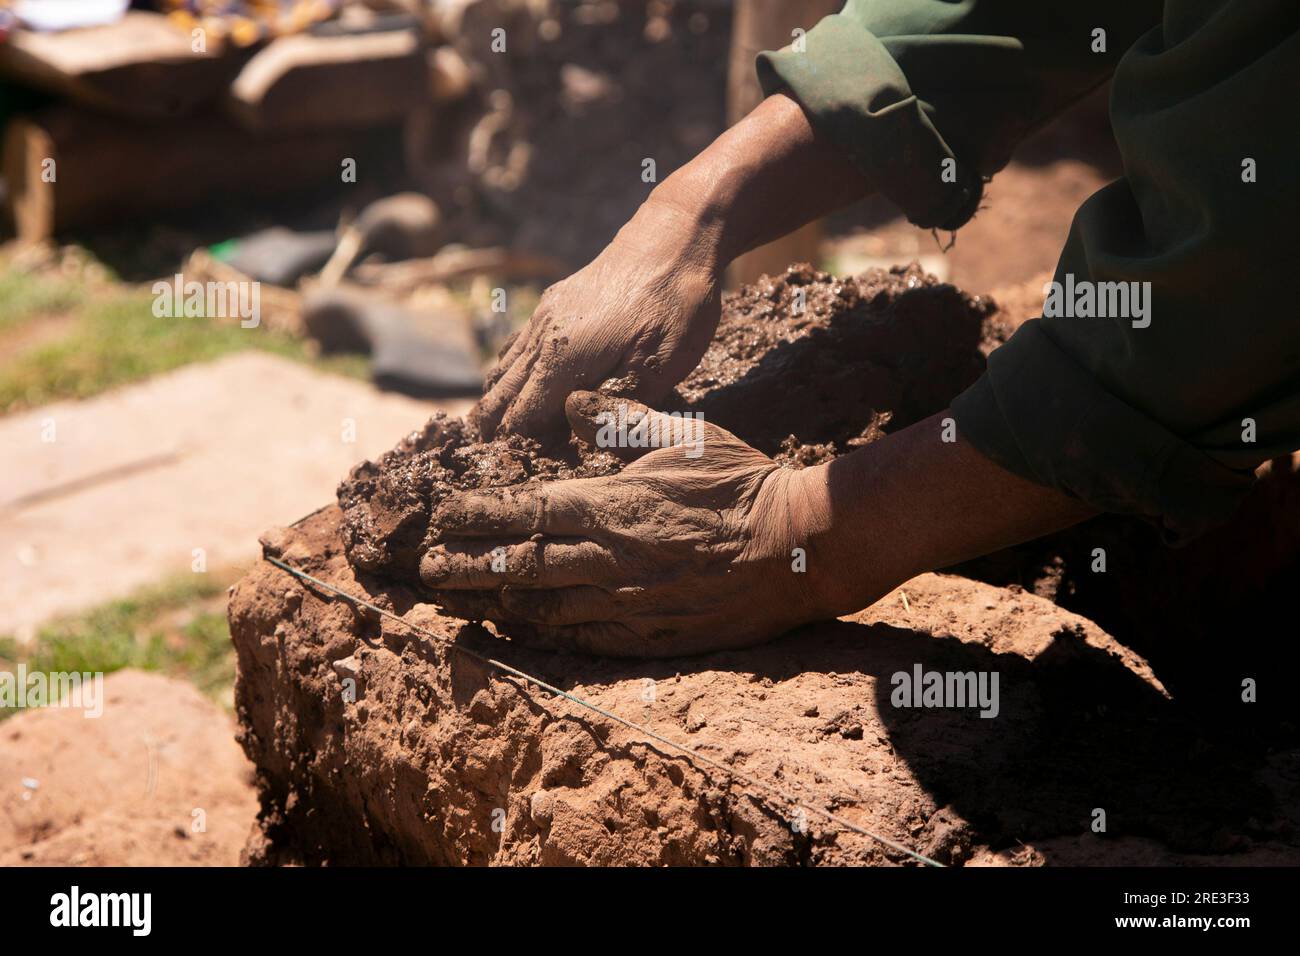 Man building with his hands an adobe house with adobe bricks and mud. Llachon region of Lake Titicaca in Peru. Stock Photo